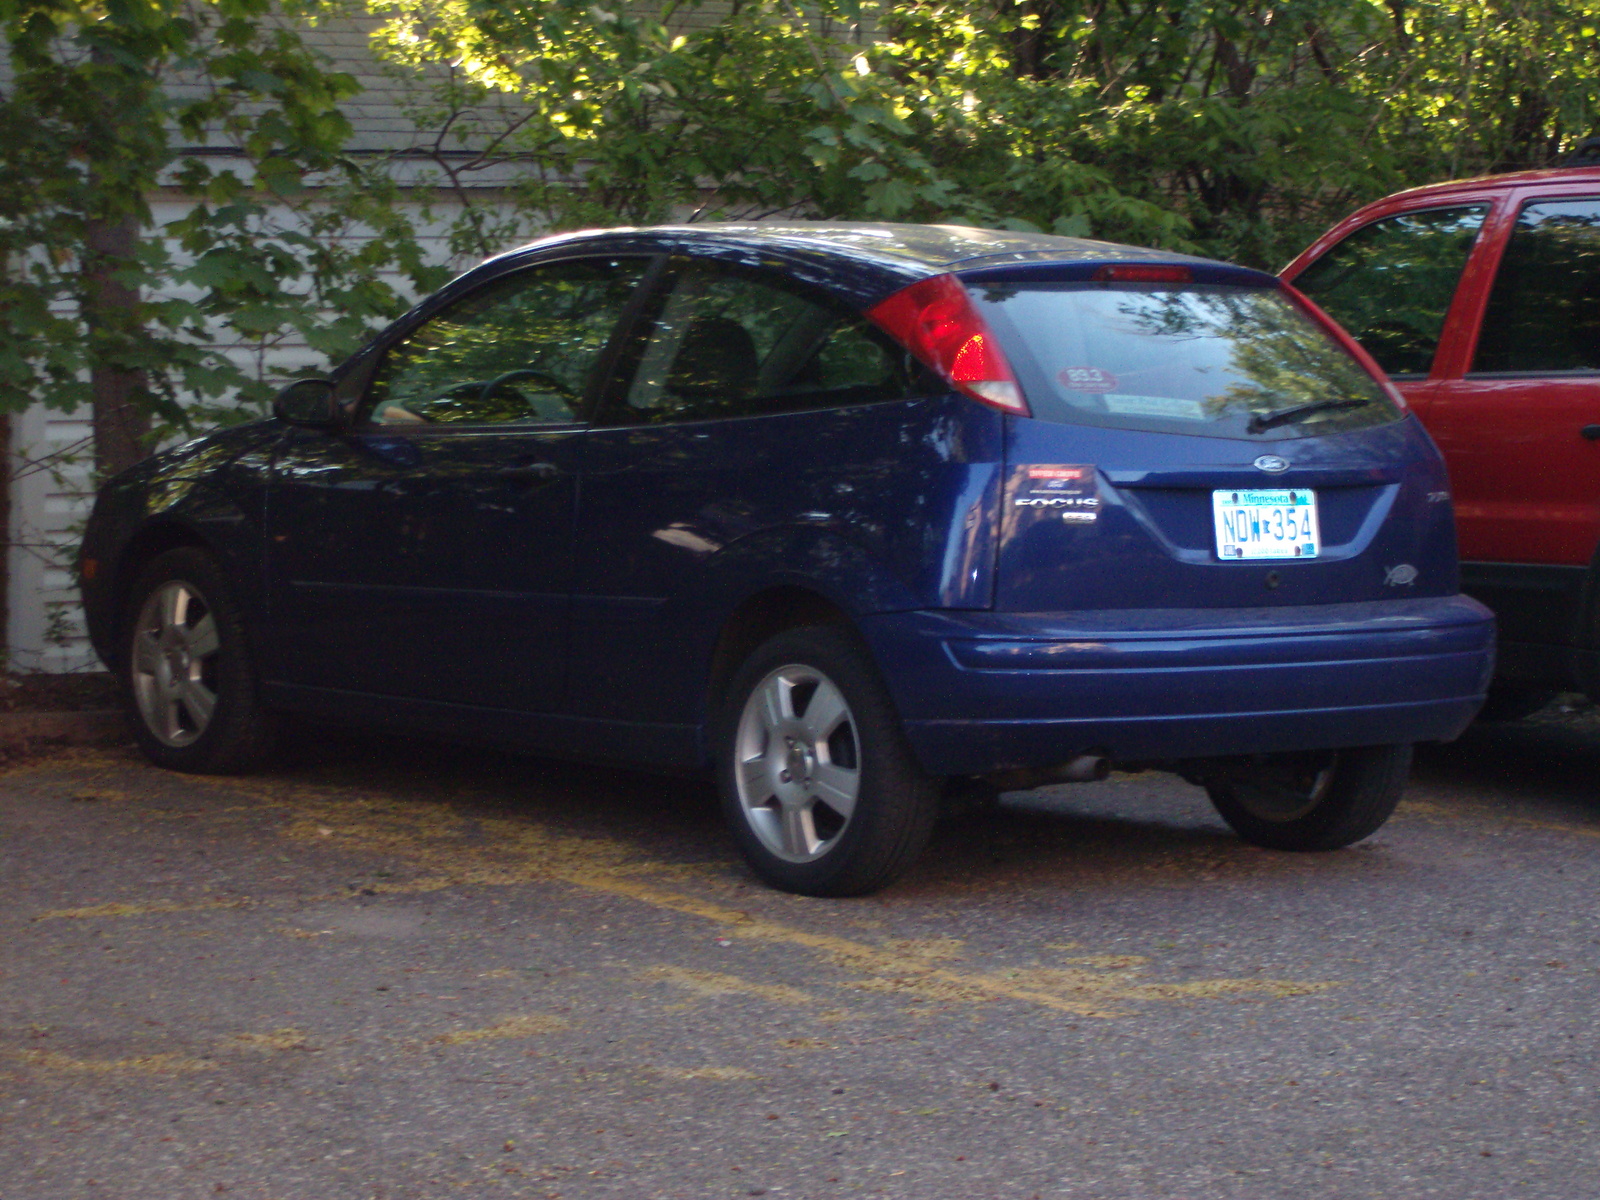 2005 Ford focus pros cons #7